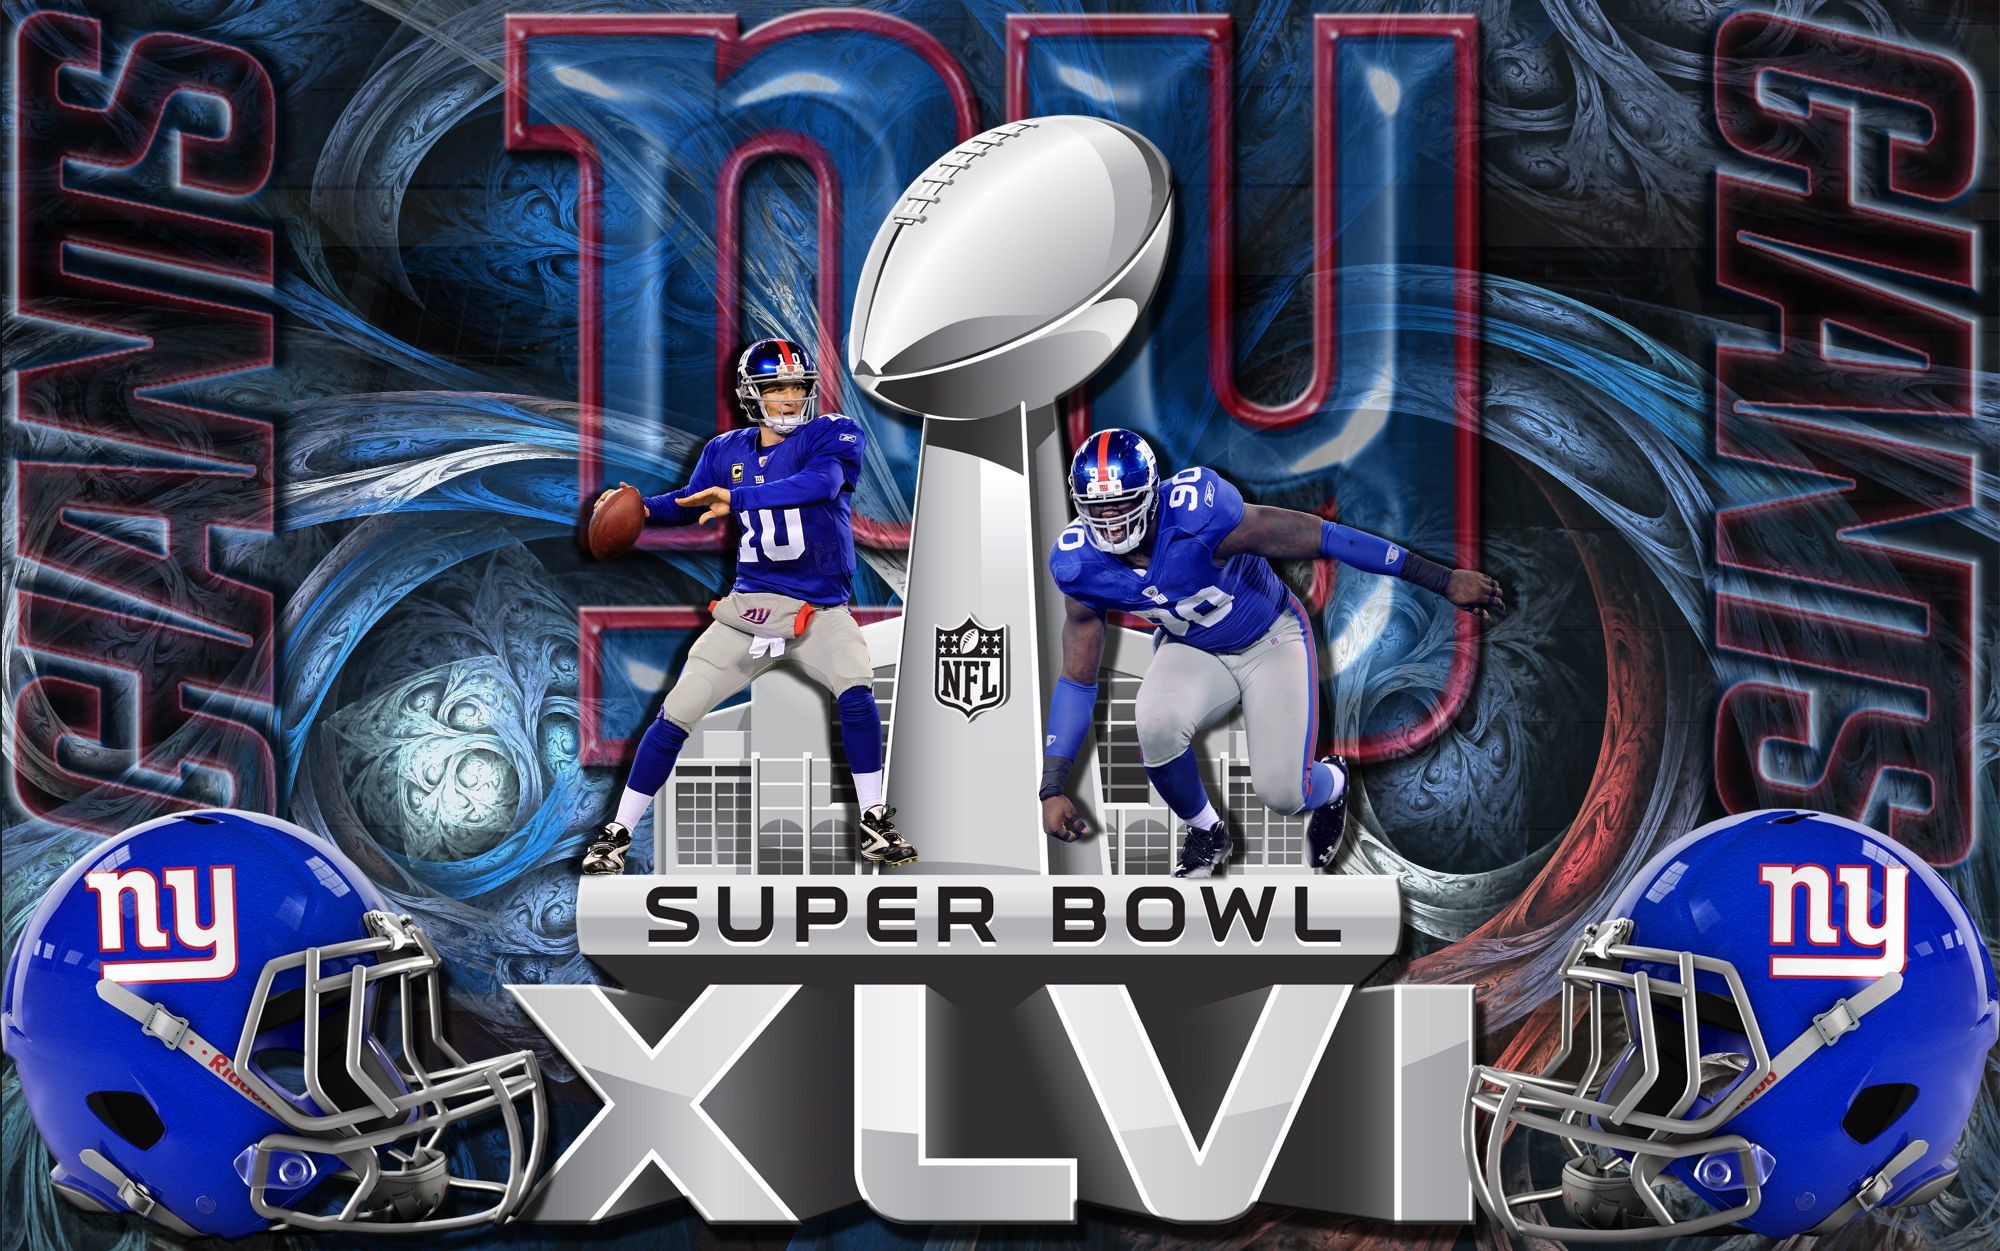 2000x1251 Awesome New York Giants wallpaper hd